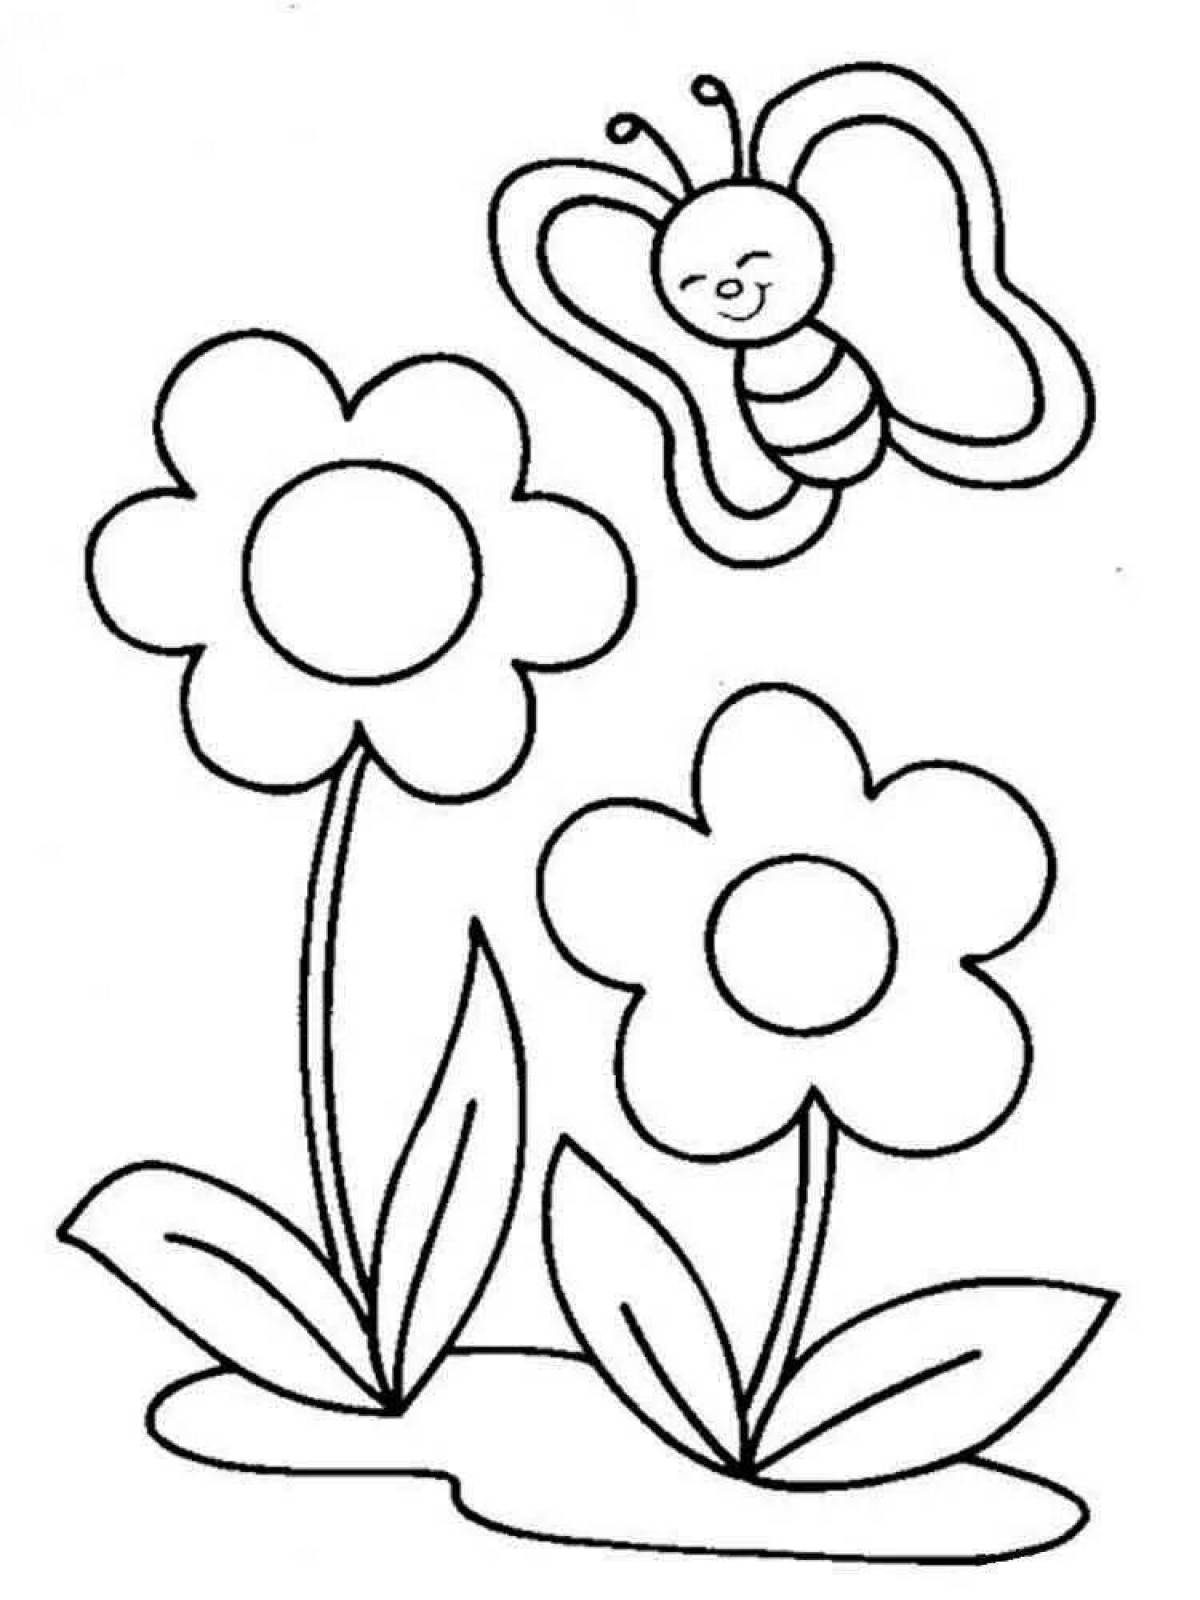 Nice coloring flowers for children 3-4 years old